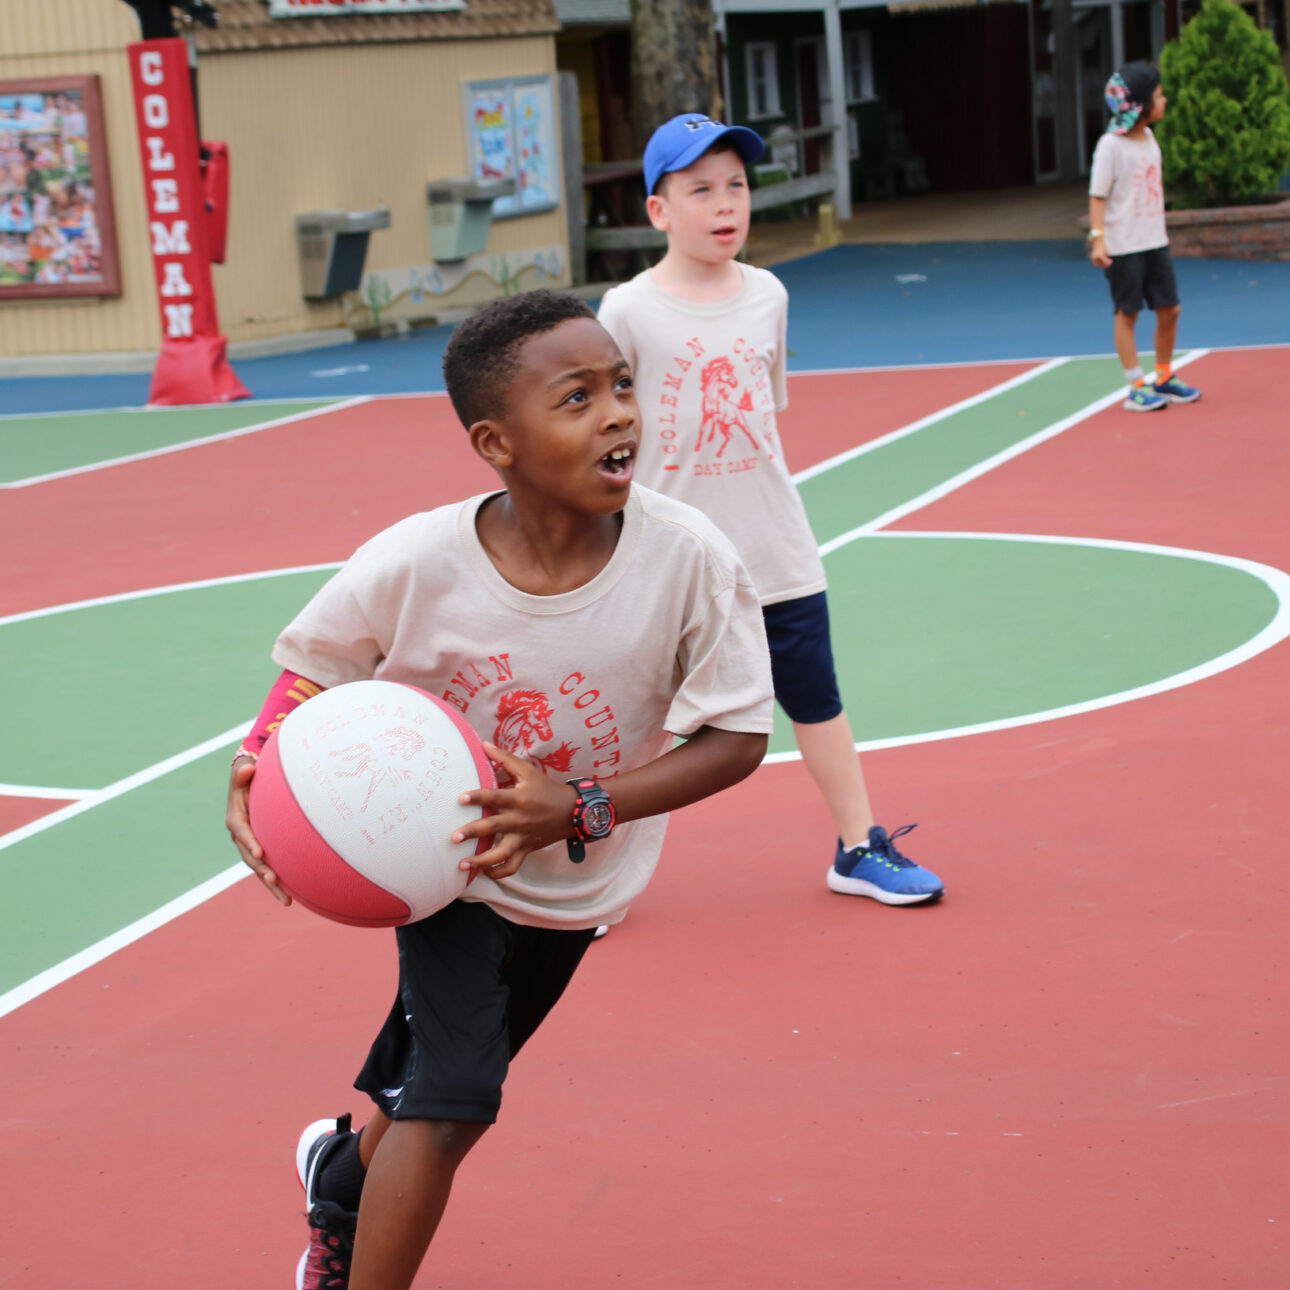 Boy camper running with a basketball during a game